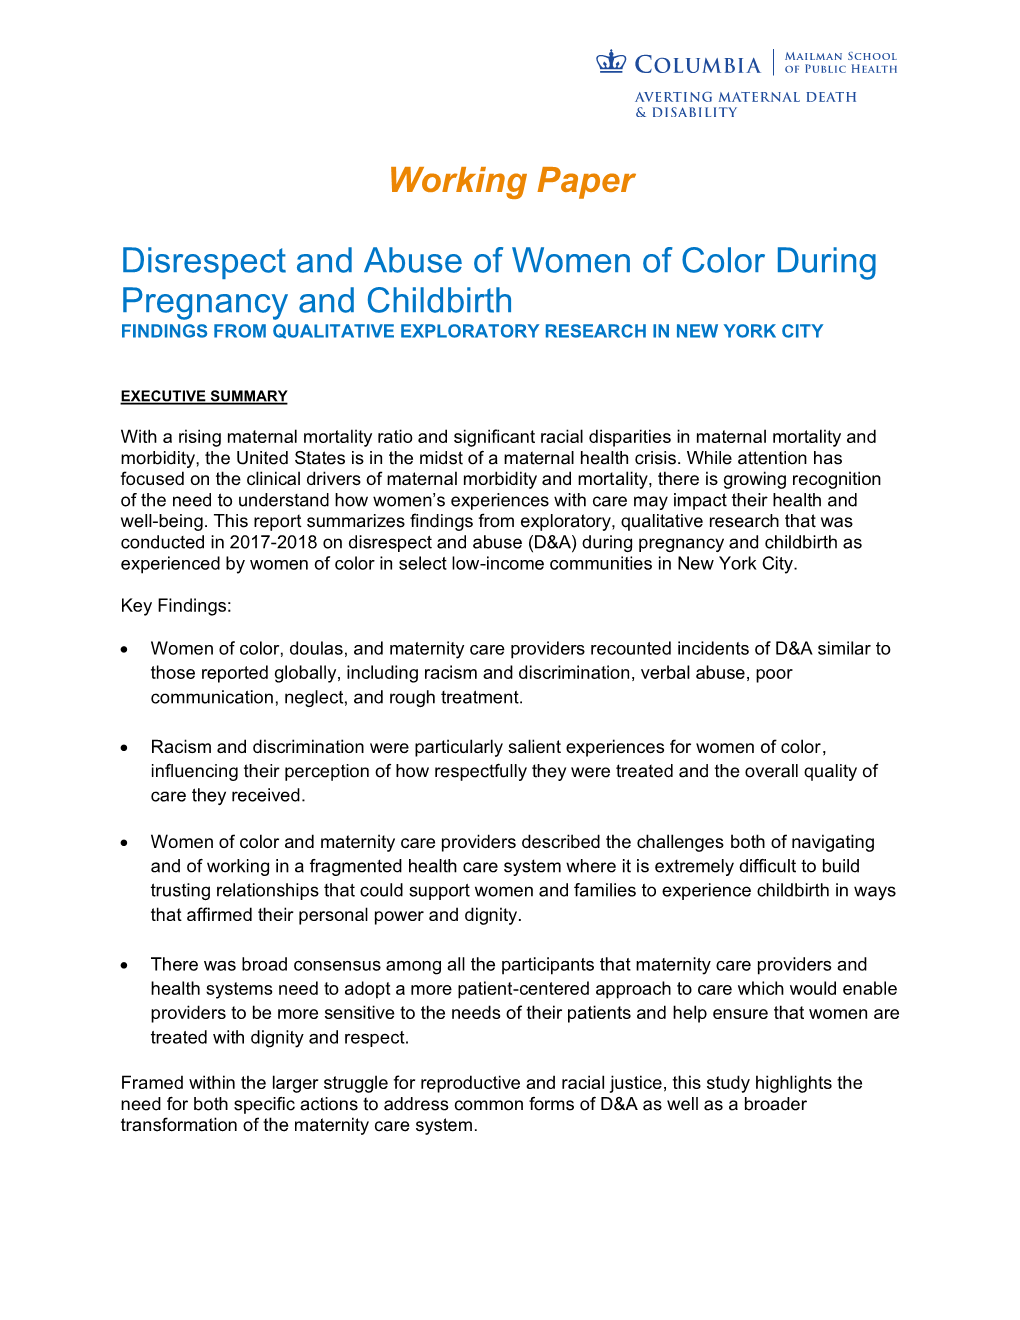 Disrespect and Abuse of Women of Color During Pregnancy and Childbirth FINDINGS from QUALITATIVE EXPLORATORY RESEARCH in NEW YORK CITY